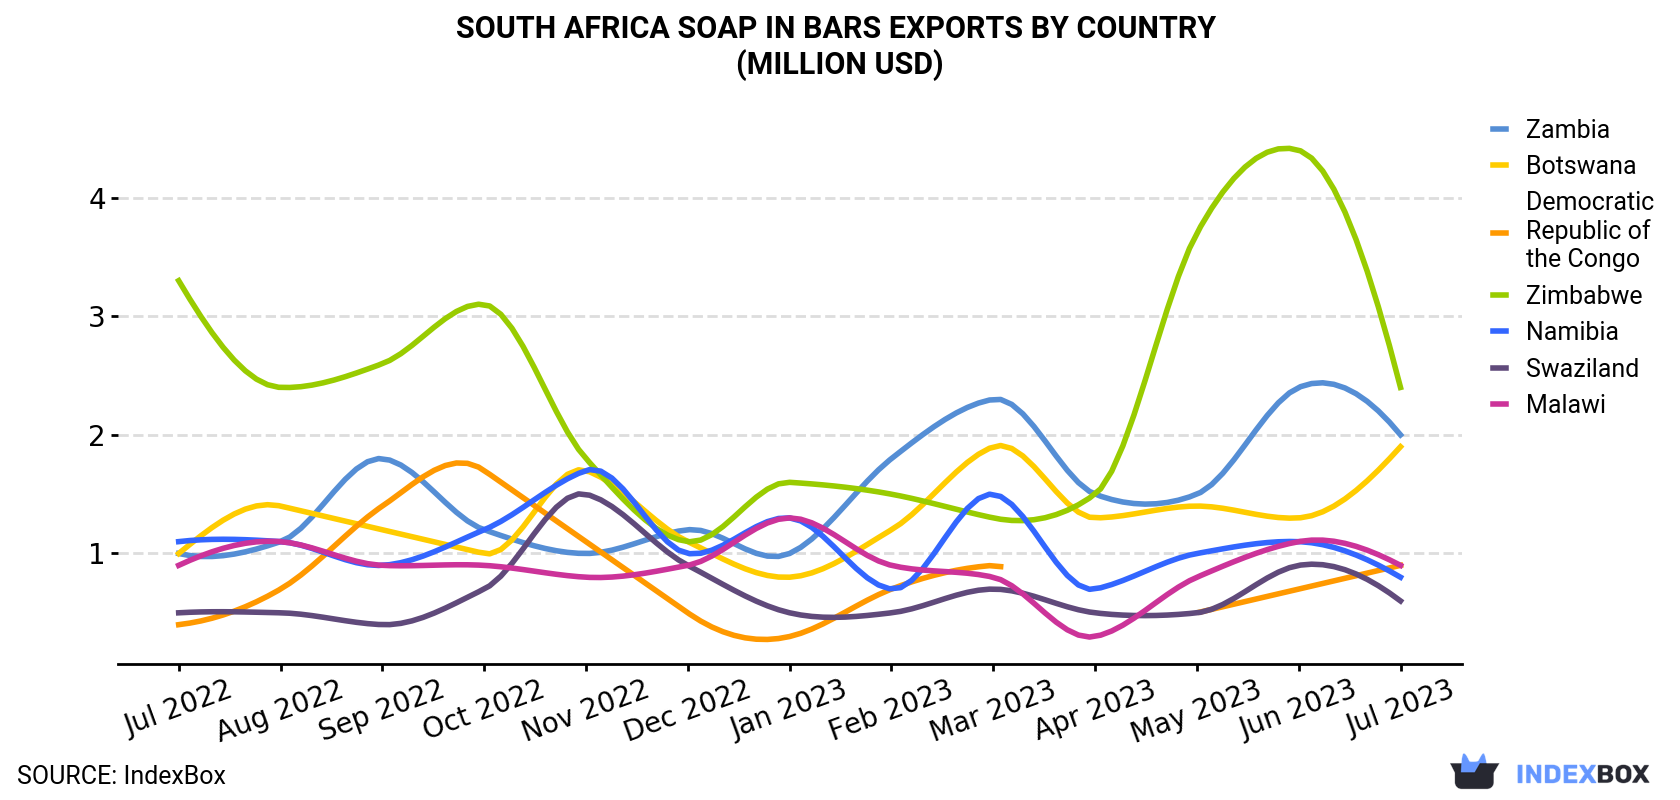 South Africa Soap In Bars Exports By Country (Million USD)